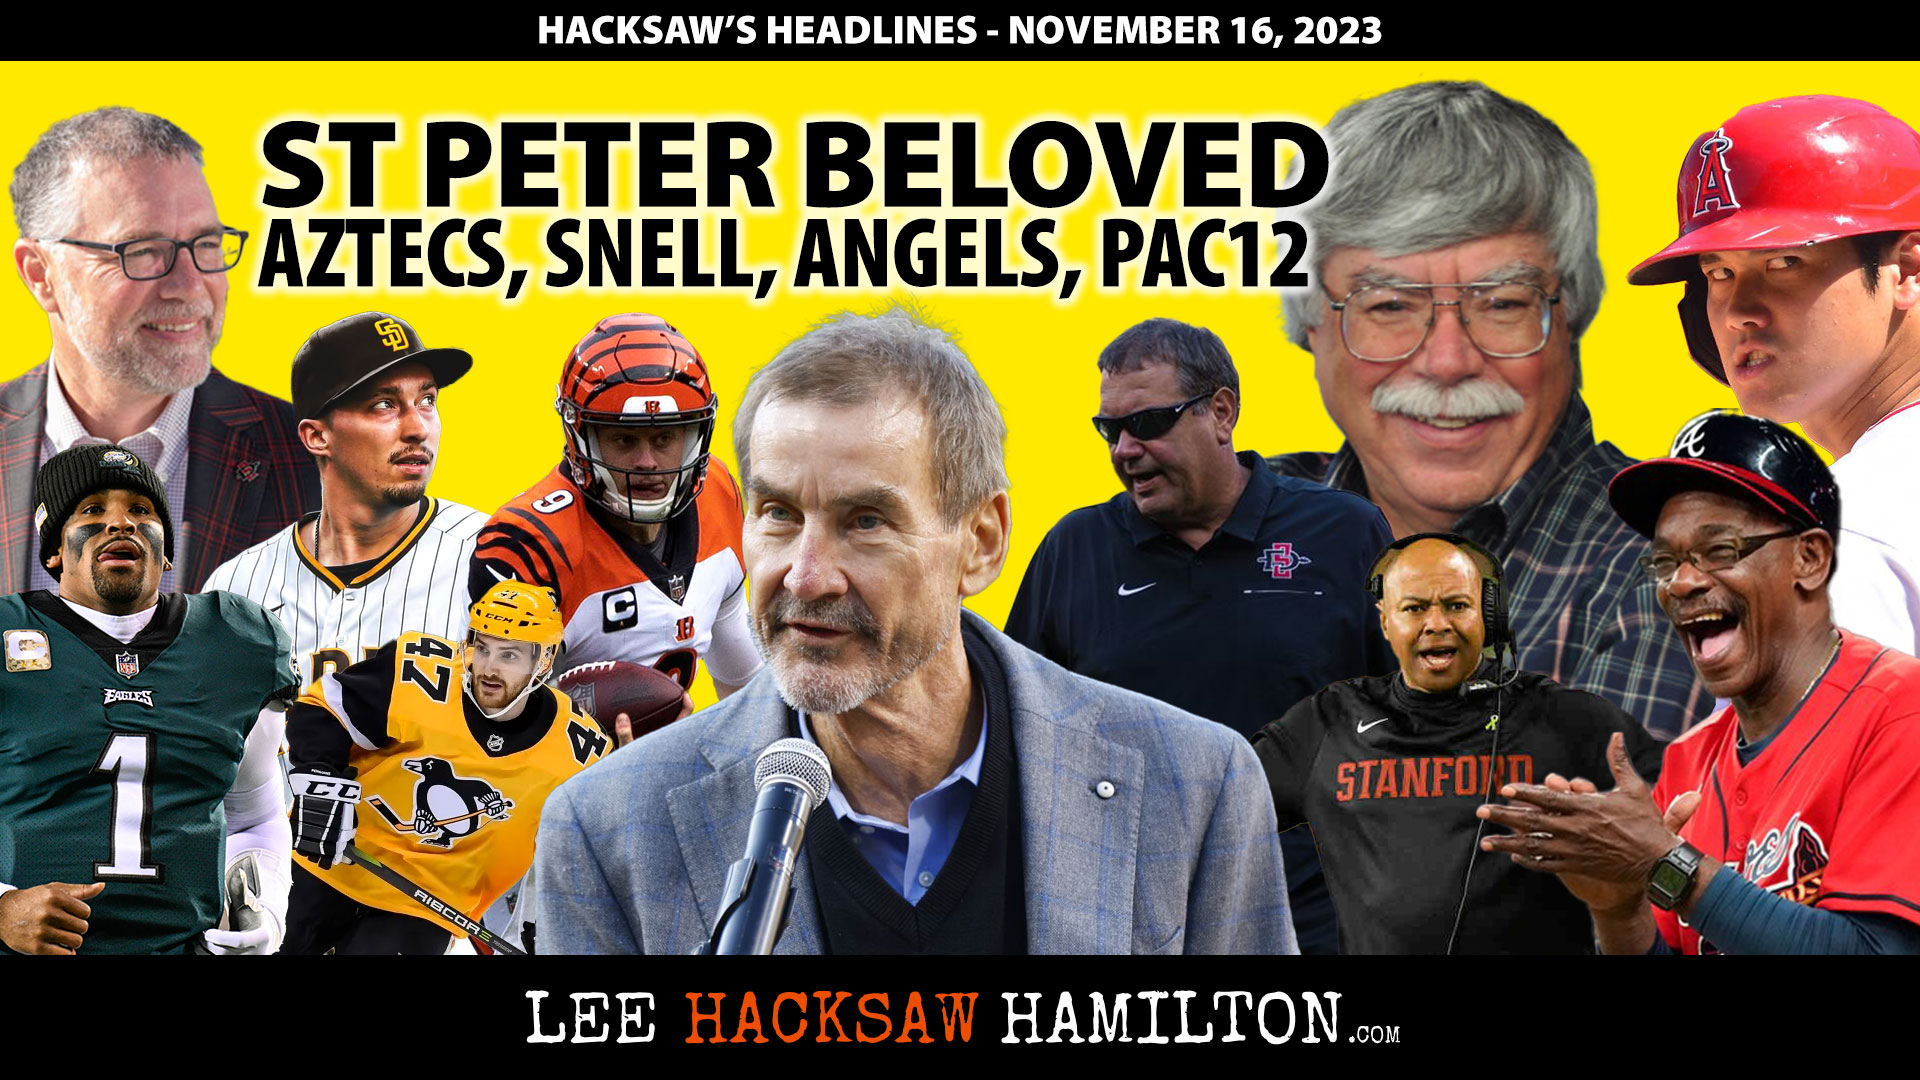 Lee Hacksaw Hamilton discusses Padre Fans Mourn Peter Seidler, Angels, MLB Headlines, Aztecs, Chargers, NFL Week #11, PAC12